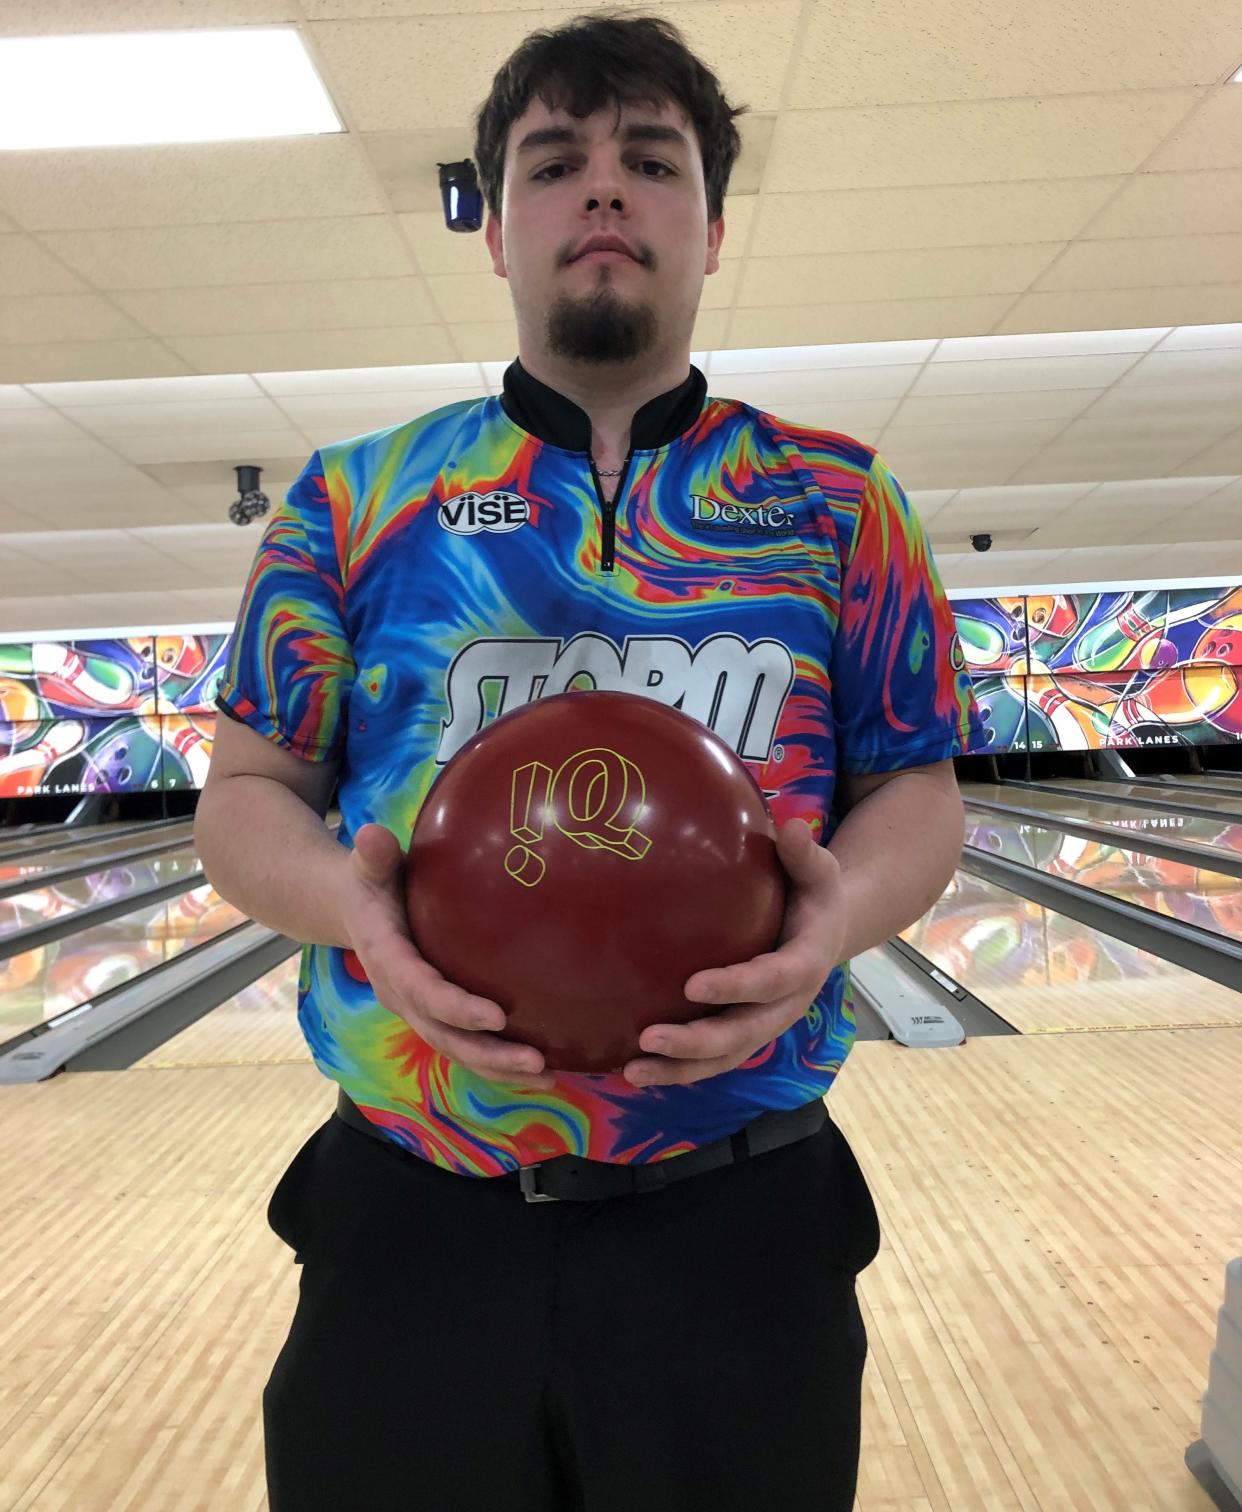 Heath graduate Konnor Goodin, who won the Division II state bowling title in 2020, recently rolled an 868 series at Redskin Lanes. He is now an assistant coach for the Bulldogs, and the 21-year-old Goodin is headed to the USBC Open Championships next week in Las Vegas.